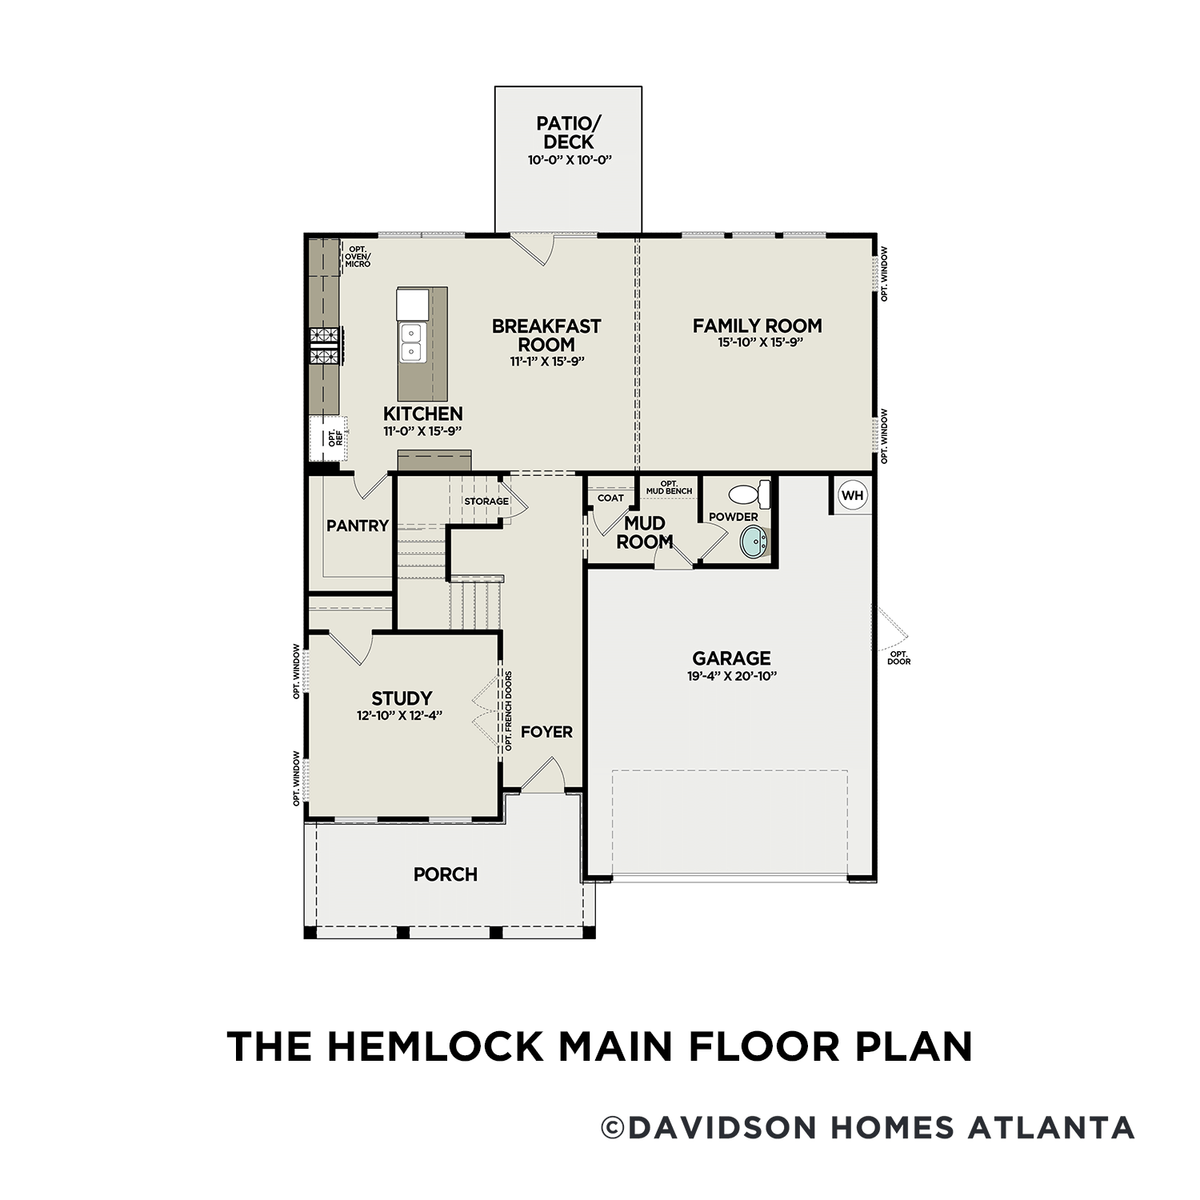 1 - The Hemlock A buildable floor plan layout in Davidson Homes' Riverwood community.